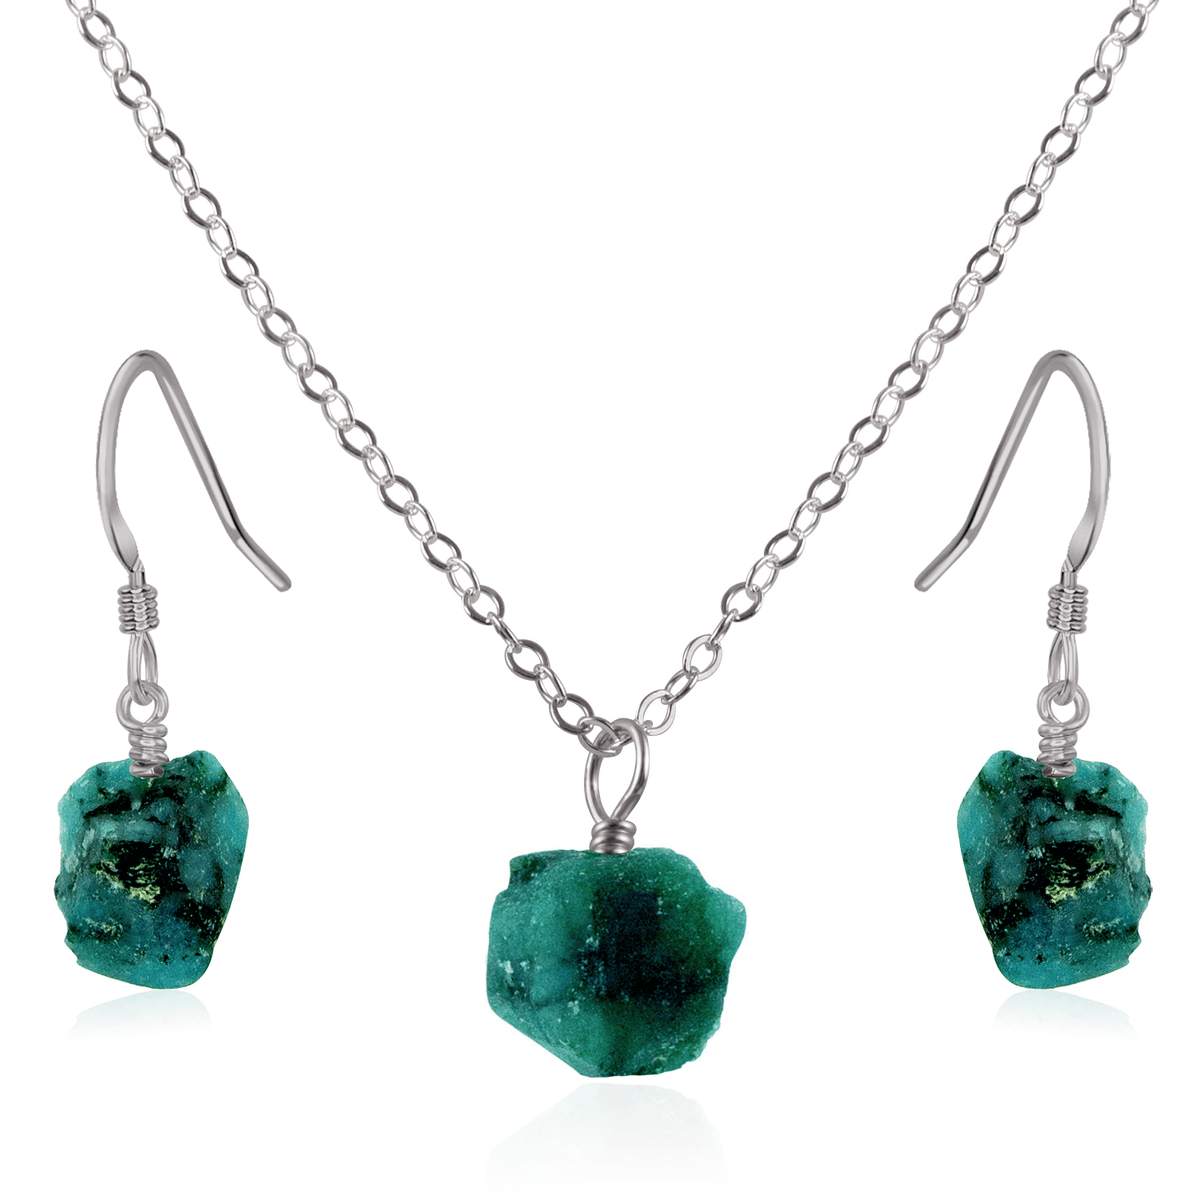 Raw Emerald Crystal Earrings & Necklace Set - Raw Emerald Crystal Earrings & Necklace Set - Stainless Steel / Cable - Luna Tide Handmade Crystal Jewellery